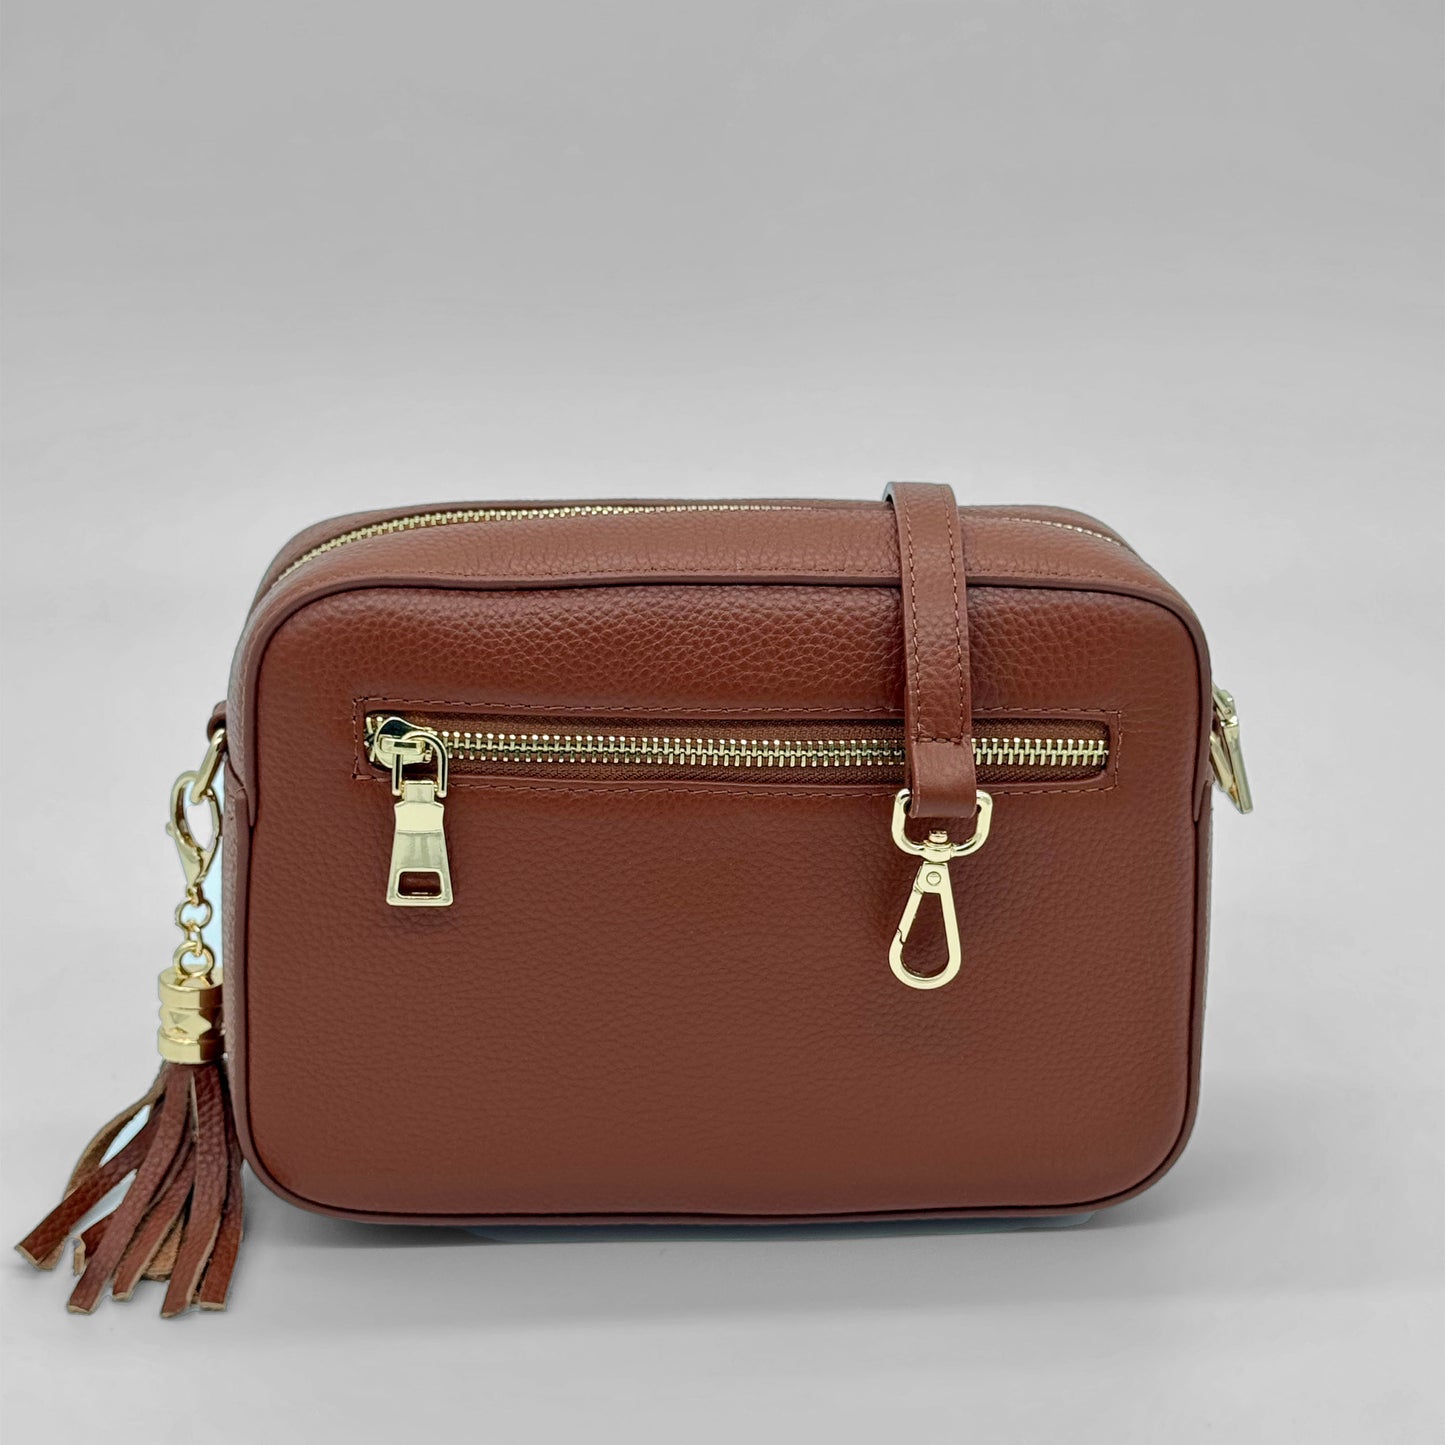 Bag with Matching Leather Strap